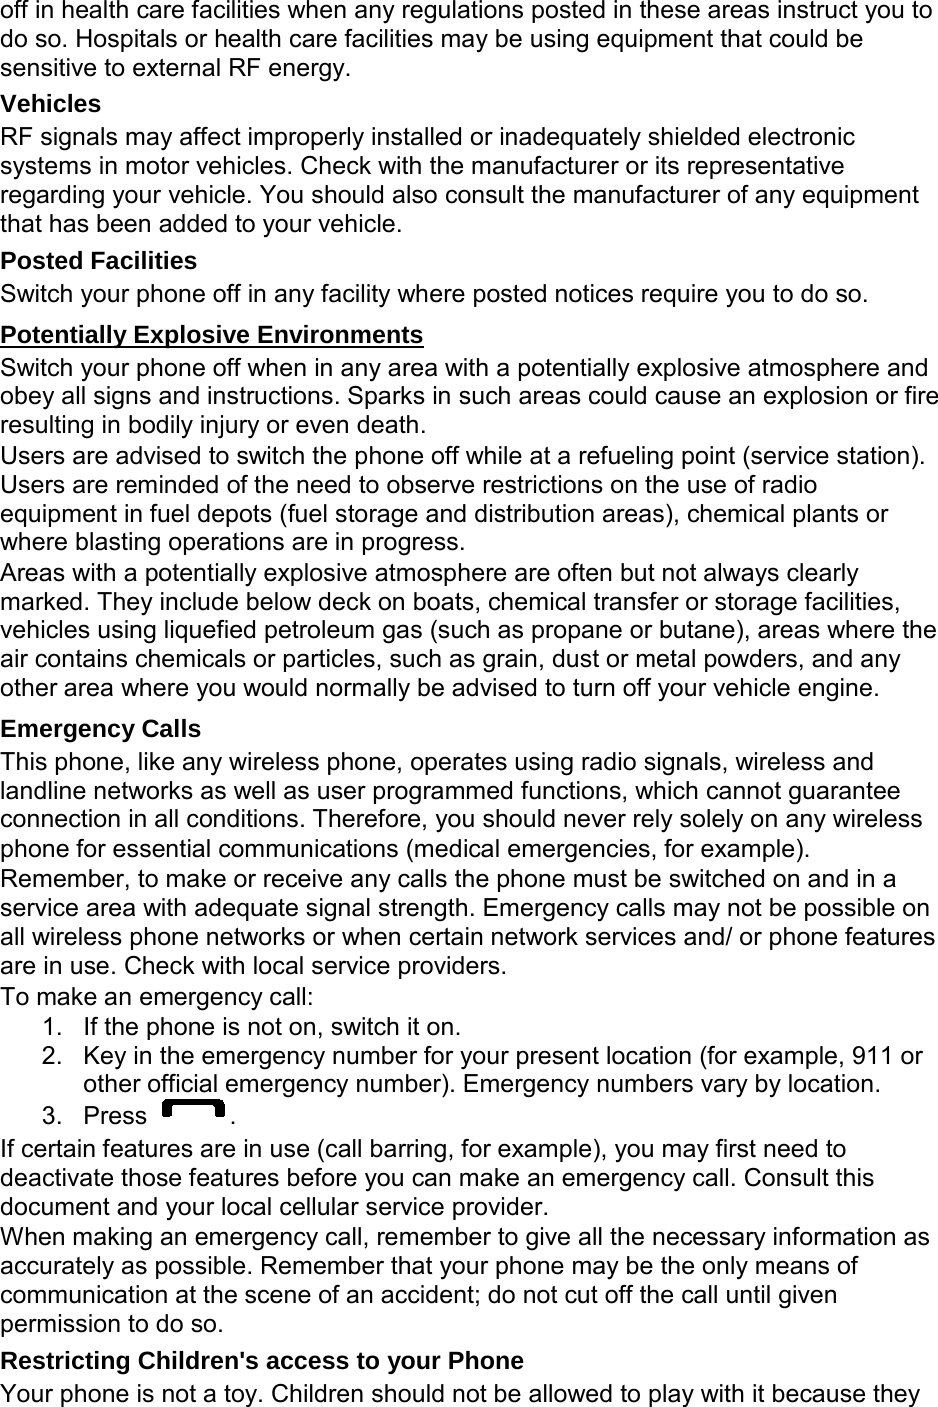 off in health care facilities when any regulations posted in these areas instruct you to do so. Hospitals or health care facilities may be using equipment that could be sensitive to external RF energy. Vehicles RF signals may affect improperly installed or inadequately shielded electronic systems in motor vehicles. Check with the manufacturer or its representative regarding your vehicle. You should also consult the manufacturer of any equipment that has been added to your vehicle. Posted Facilities Switch your phone off in any facility where posted notices require you to do so. Switch your phone off when in any area with a potentially explosive atmosphere and obey all signs and instructions. Sparks in such areas could cause an explosion or fire resulting in bodily injury or even death. Potentially Explosive Environments Users are advised to switch the phone off while at a refueling point (service station). Users are reminded of the need to observe restrictions on the use of radio equipment in fuel depots (fuel storage and distribution areas), chemical plants or where blasting operations are in progress. Areas with a potentially explosive atmosphere are often but not always clearly marked. They include below deck on boats, chemical transfer or storage facilities, vehicles using liquefied petroleum gas (such as propane or butane), areas where the air contains chemicals or particles, such as grain, dust or metal powders, and any other area where you would normally be advised to turn off your vehicle engine. Emergency Calls This phone, like any wireless phone, operates using radio signals, wireless and landline networks as well as user programmed functions, which cannot guarantee connection in all conditions. Therefore, you should never rely solely on any wireless phone for essential communications (medical emergencies, for example). Remember, to make or receive any calls the phone must be switched on and in a service area with adequate signal strength. Emergency calls may not be possible on all wireless phone networks or when certain network services and/ or phone features are in use. Check with local service providers. To make an emergency call: 1. If the phone is not on, switch it on. 2. Key in the emergency number for your present location (for example, 911 or other official emergency number). Emergency numbers vary by location. 3.  Press  . If certain features are in use (call barring, for example), you may first need to deactivate those features before you can make an emergency call. Consult this document and your local cellular service provider. When making an emergency call, remember to give all the necessary information as accurately as possible. Remember that your phone may be the only means of communication at the scene of an accident; do not cut off the call until given permission to do so. Restricting Children&apos;s access to your Phone Your phone is not a toy. Children should not be allowed to play with it because they 